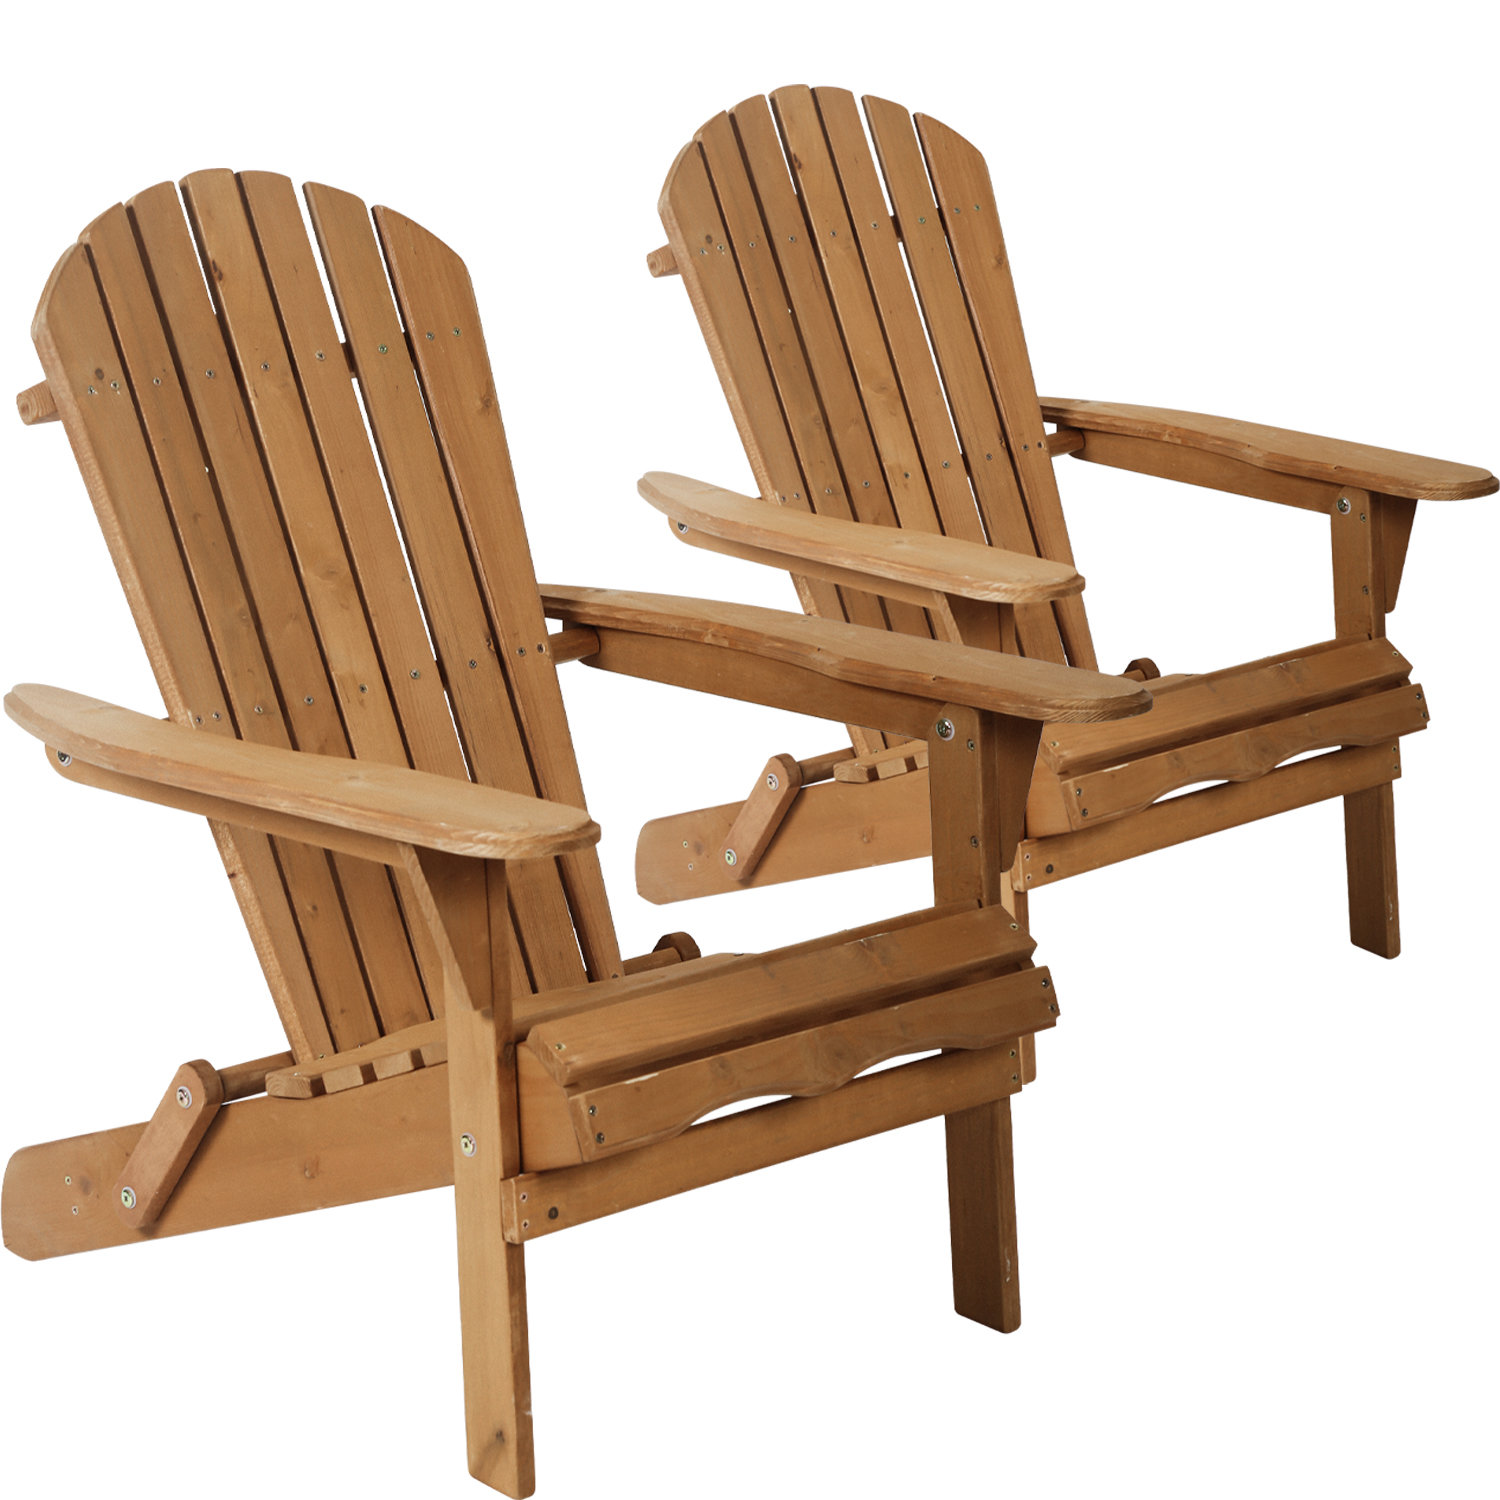 YRLLENSDAN Folding Adirondack Chair Set of 2, Outdoor Chairs Wood Outdoor Recliner Chair for Adult Wooden Fire Pit Chairs Patio Outdoor Lounge Furniture for Garden - Natural - image 1 of 7